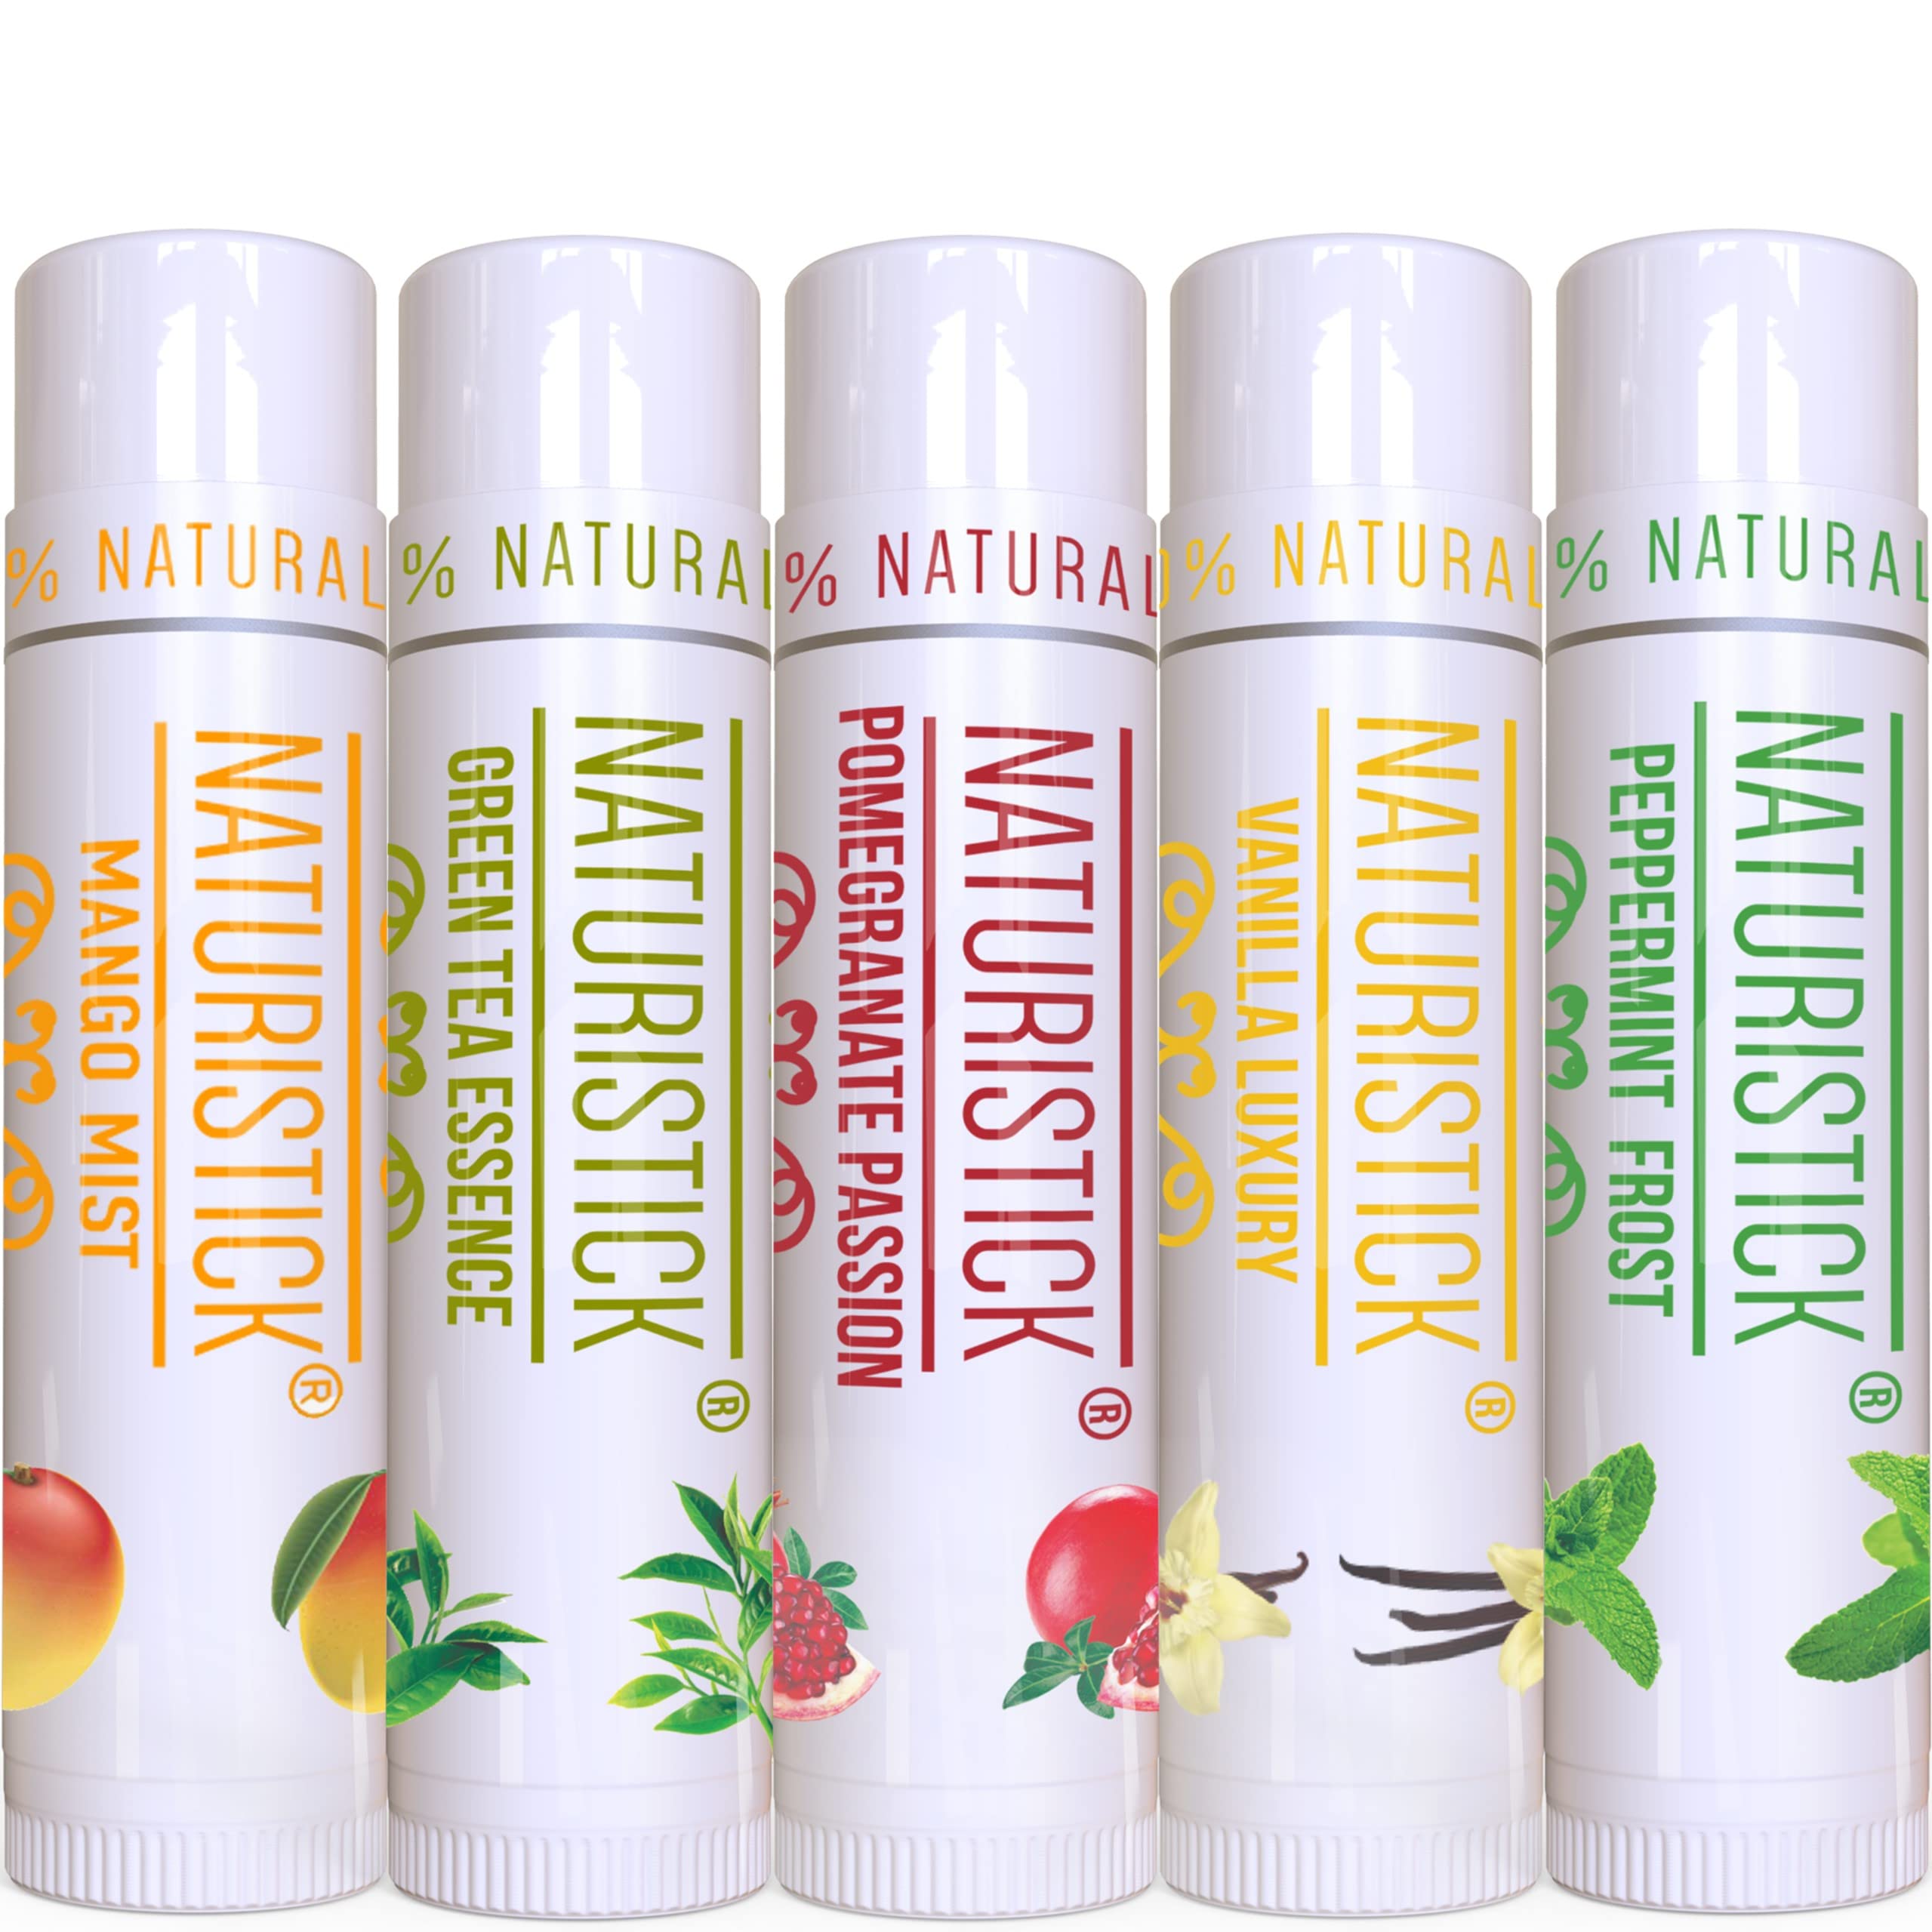 5-Pack Lip Balm Gift Set by Naturistick. Assorted Flavors. 100% Natural Ingredients. Best Beeswax Chapsticks for Dry, Chapped Lips. Made in USA for Men, Women and Children